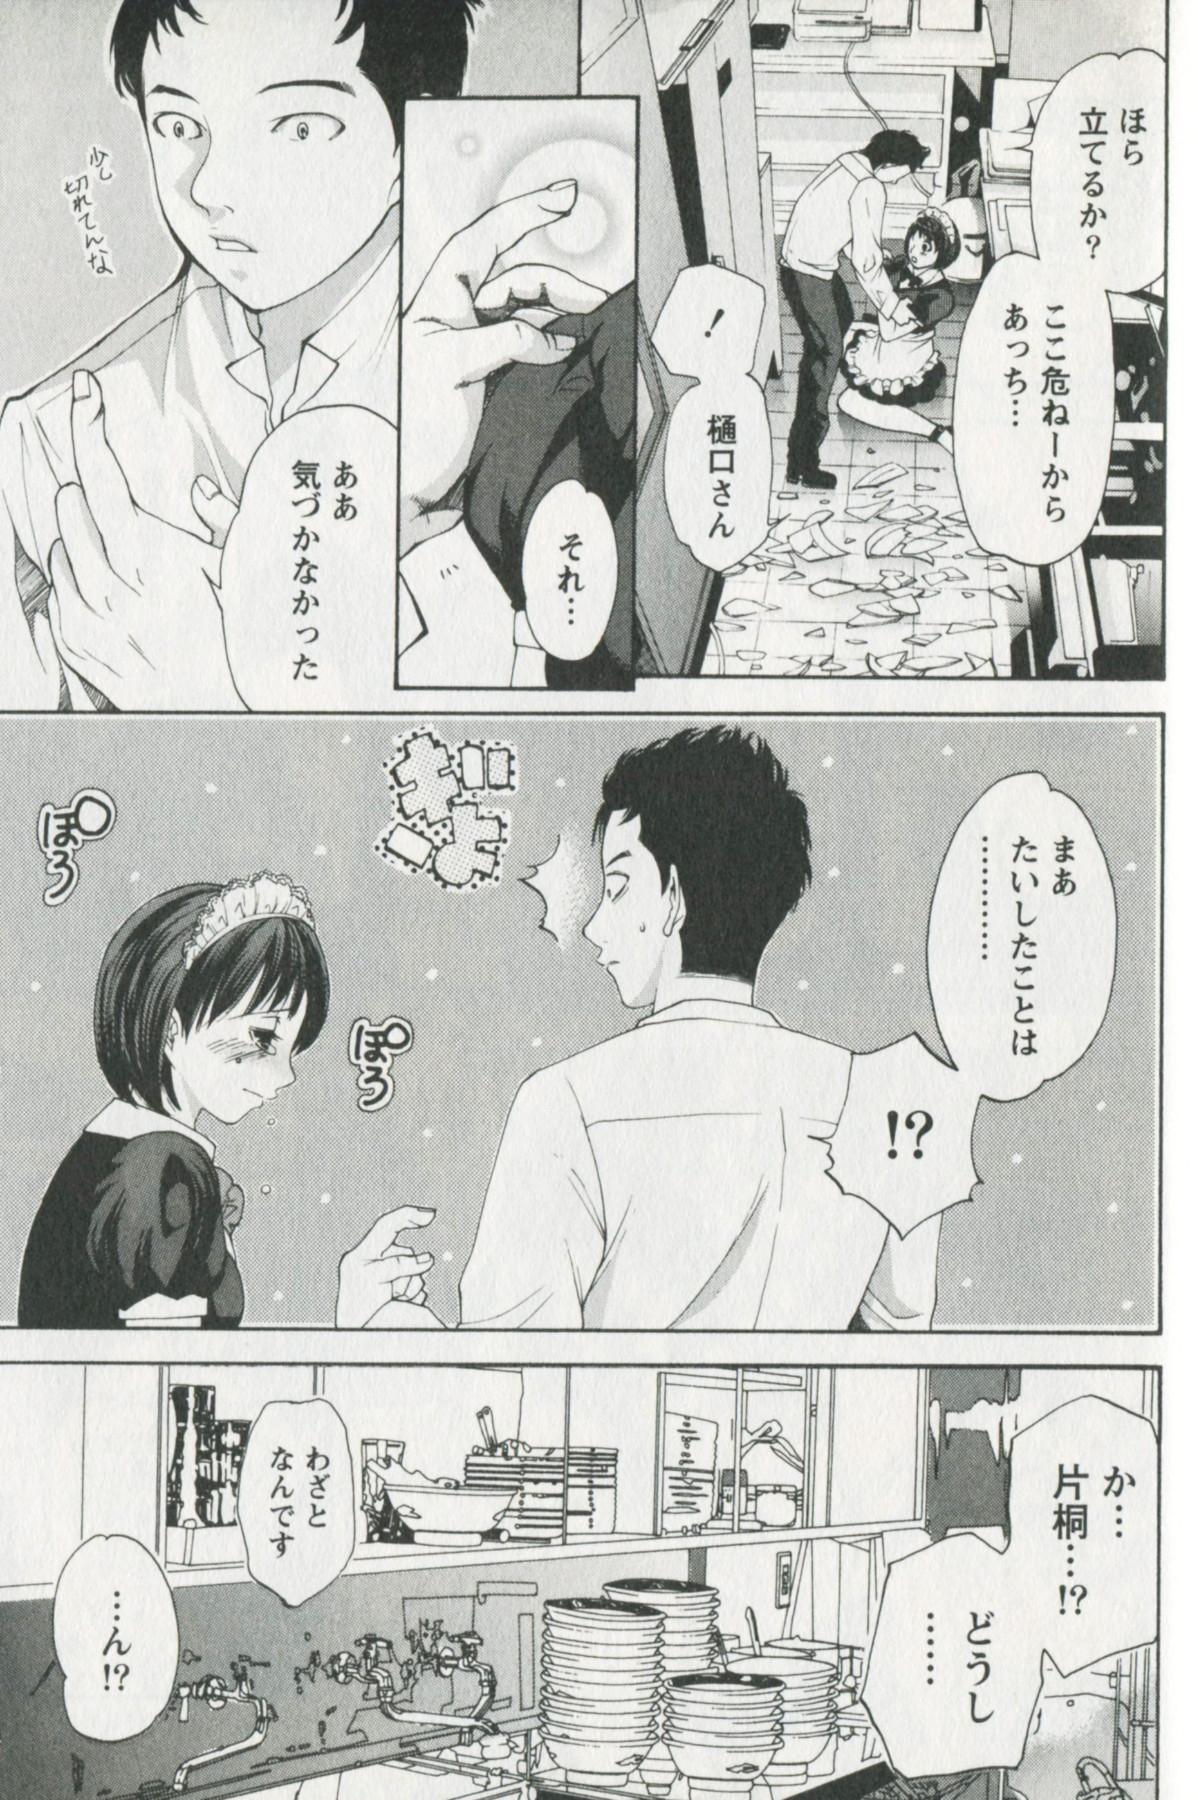 Jisho to Skirt - She Put Down the Dictionary, then Took off her Skirt. 160